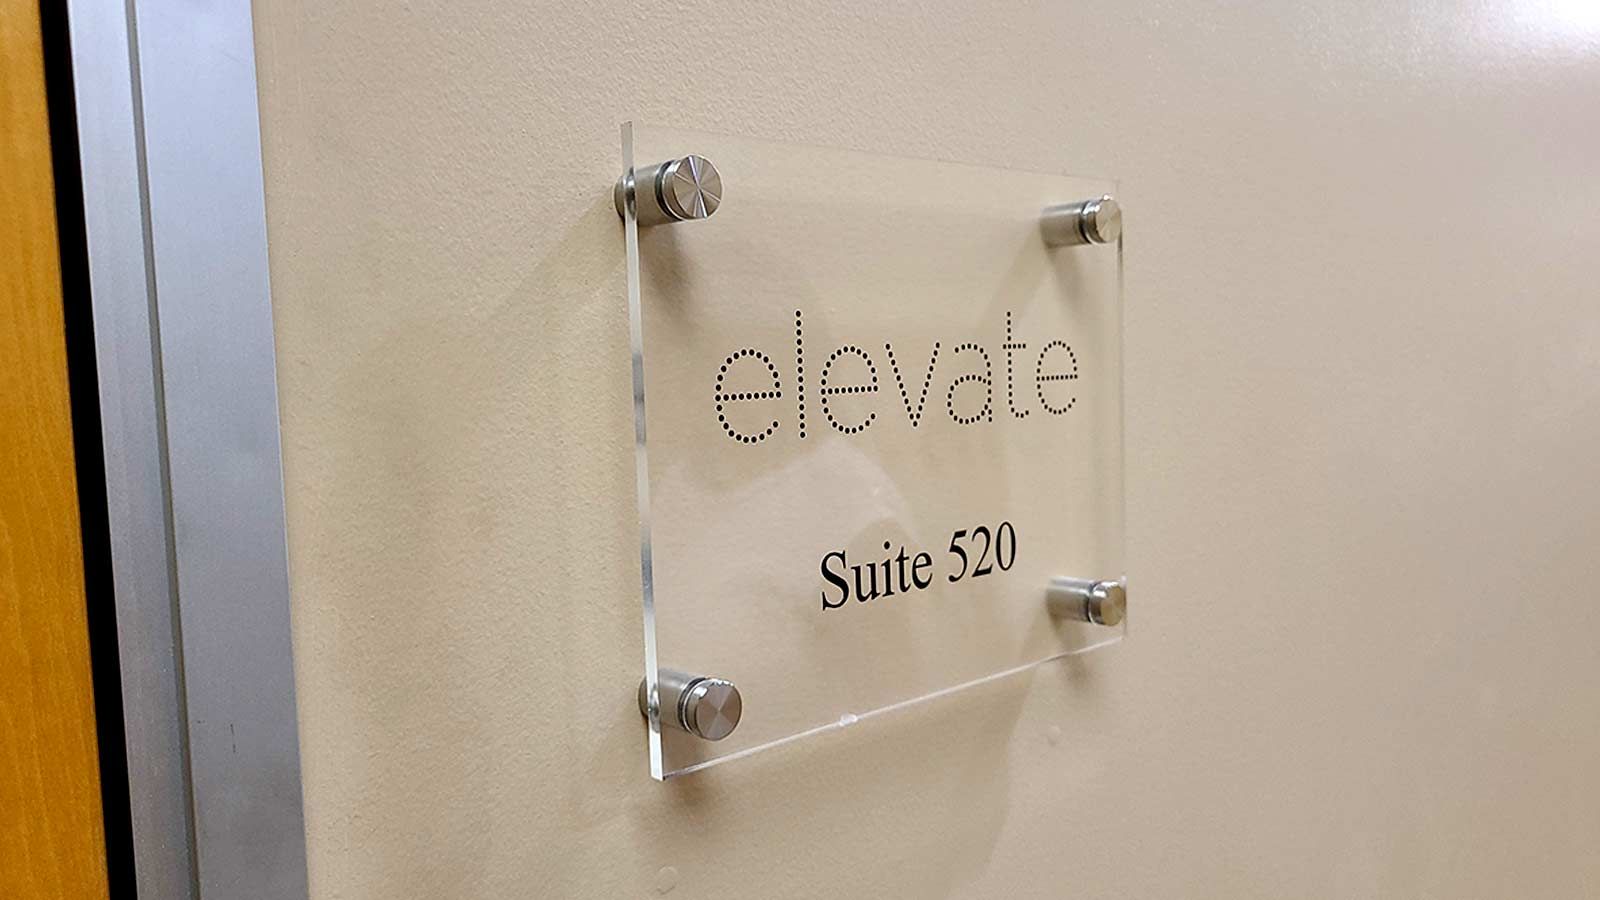 Elevate interior sign attached to the wall